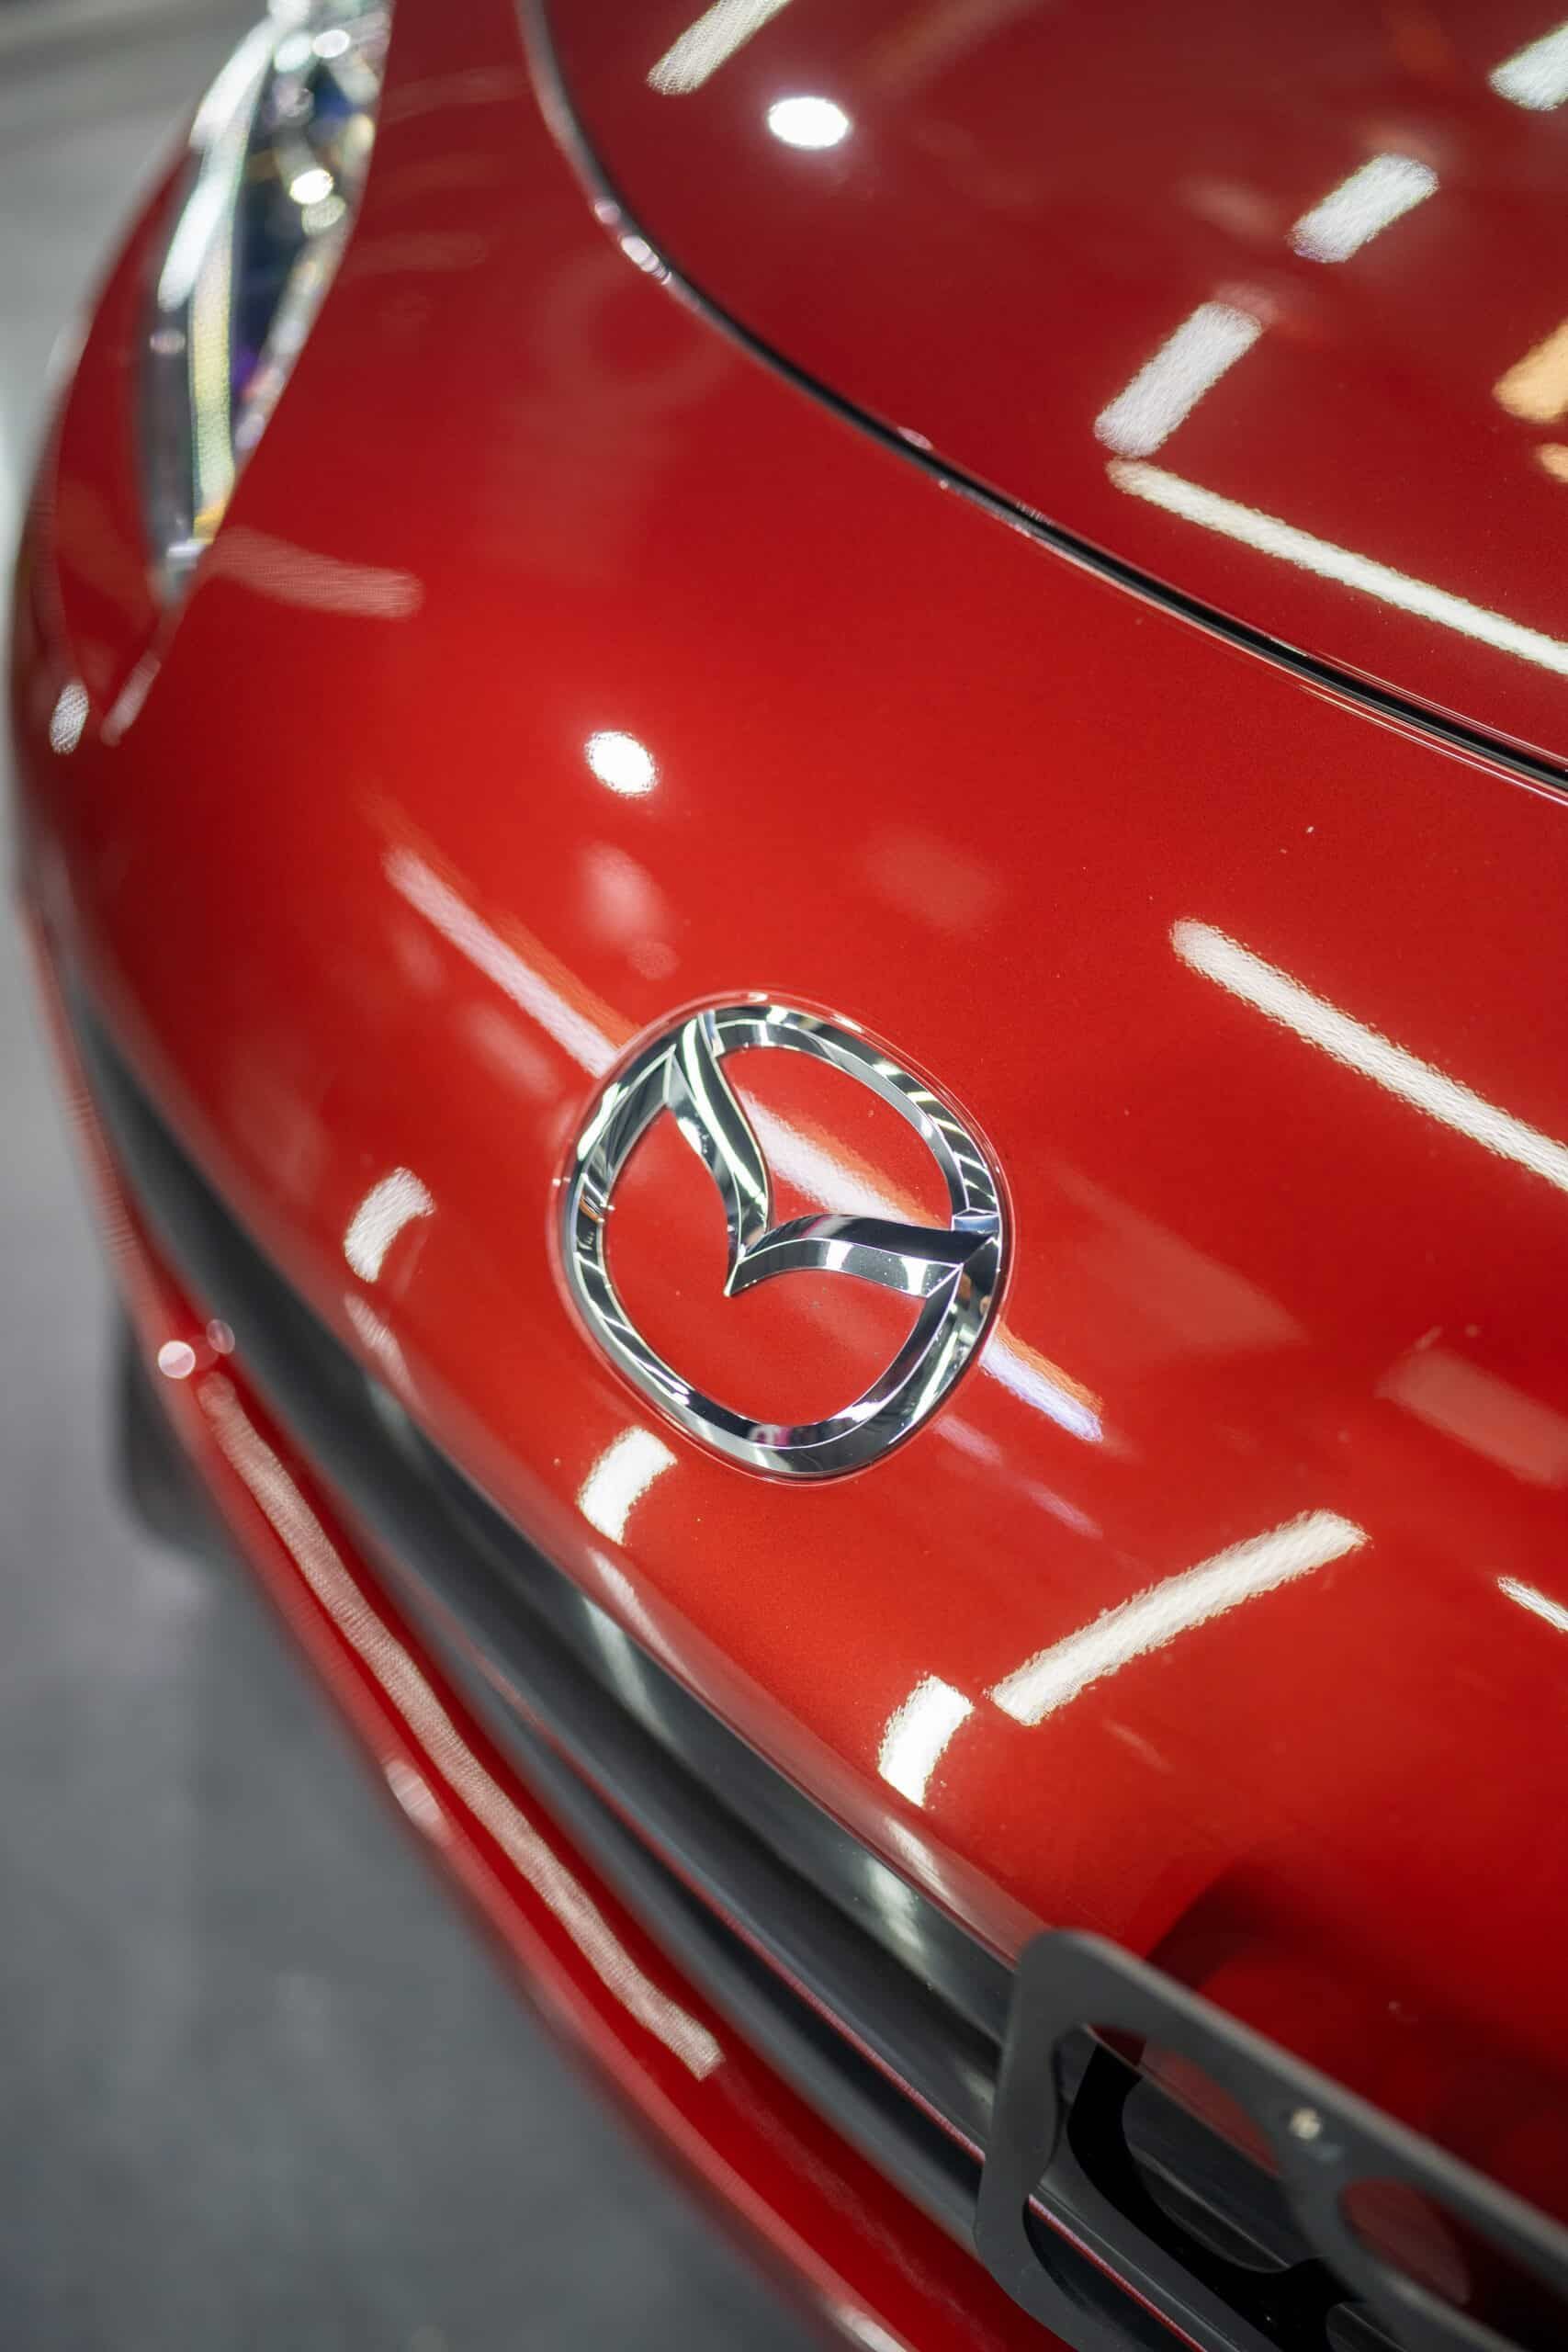 A close up of the front of a red mazda car